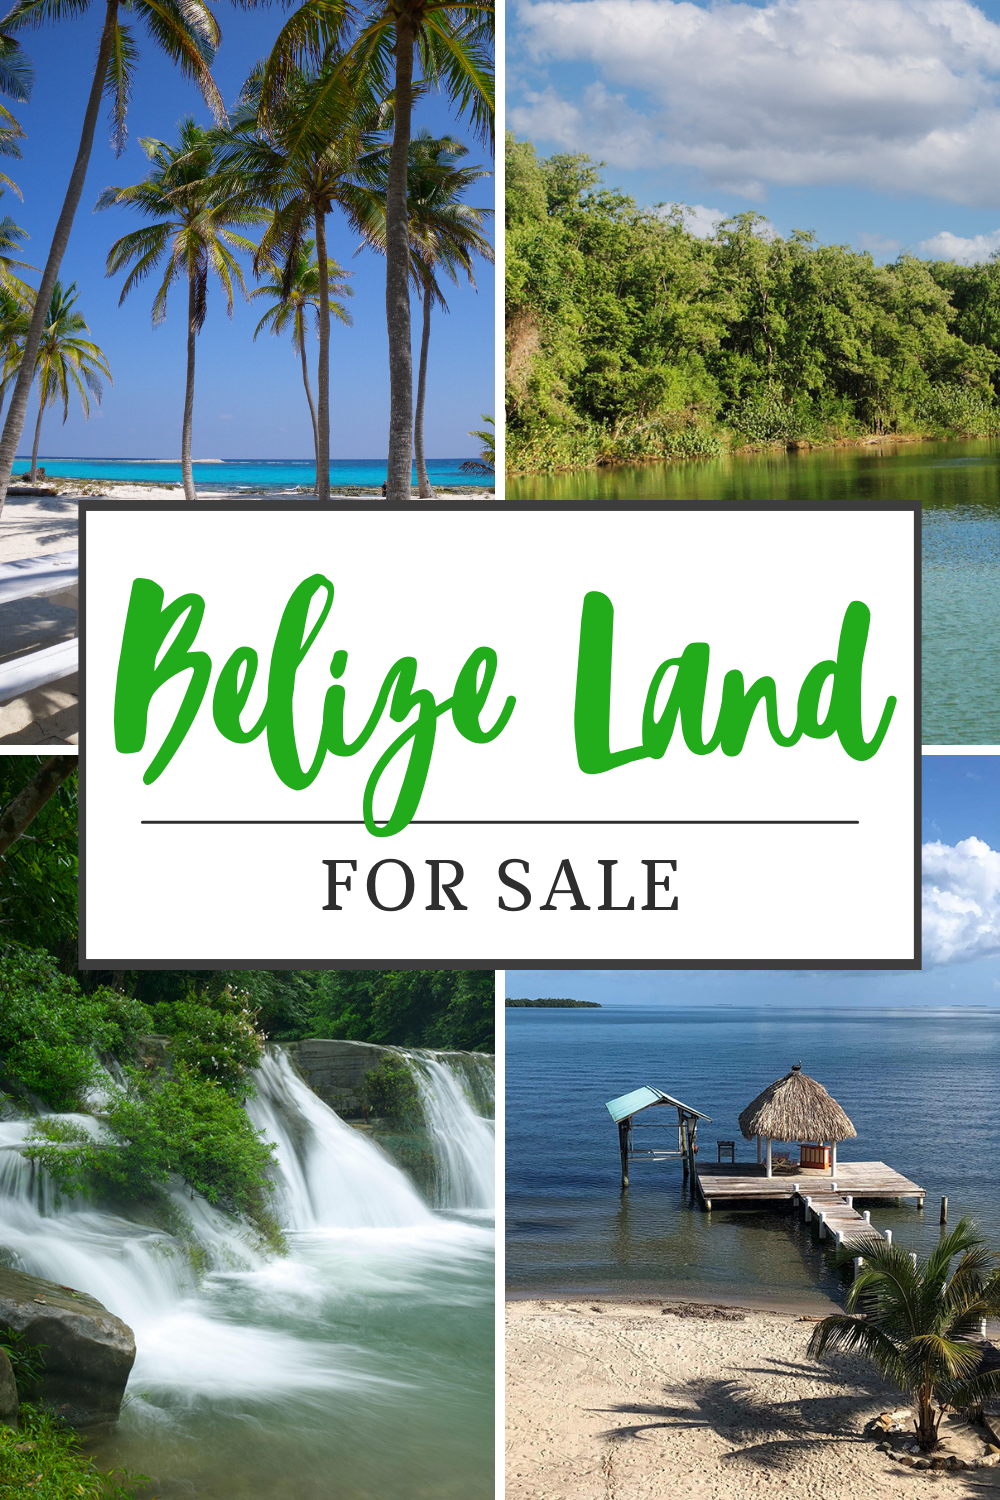 Belize Land for Sale — Jungle, farm, beachfront city and island lots. Get your own slice of paradise!